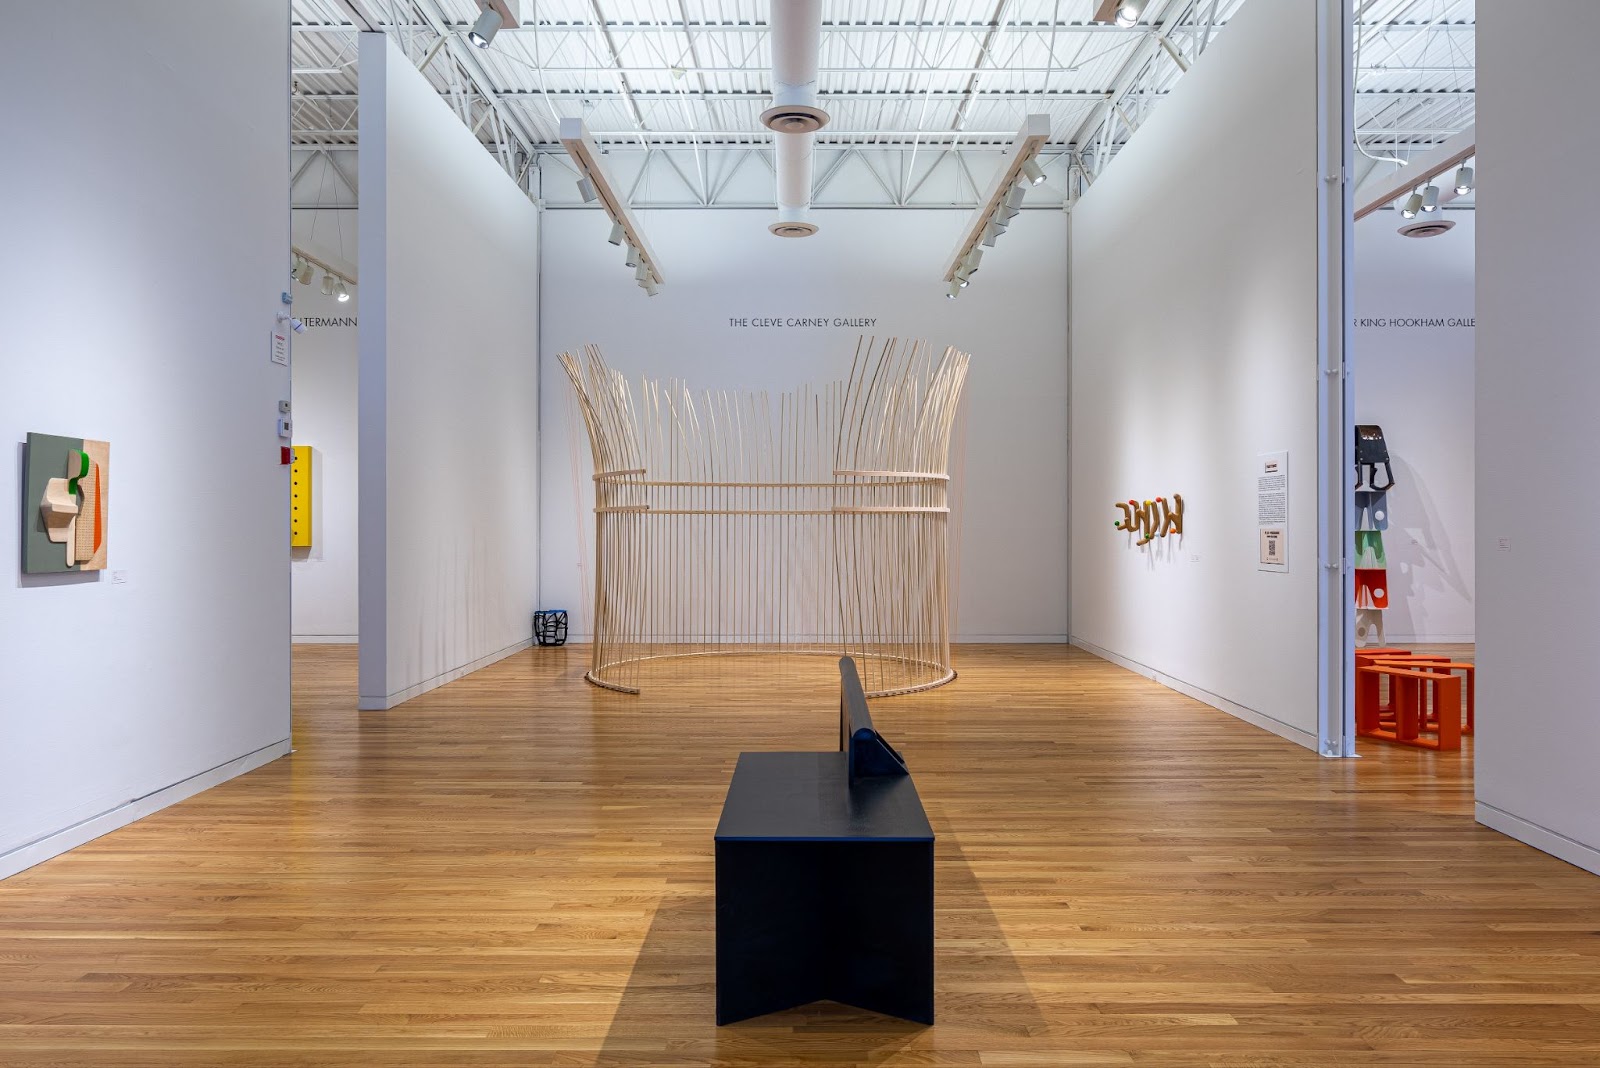 Image: Norman Teagues, Roundhouse, 2024. Poplar, maple, plywood and fishing line. Tall, thin pieces of wood are arranged into a standing structure in the center of a white-walled gallery. Photograph by Siegfried Mueller, courtesy of the Elmhurst Art Museum. 